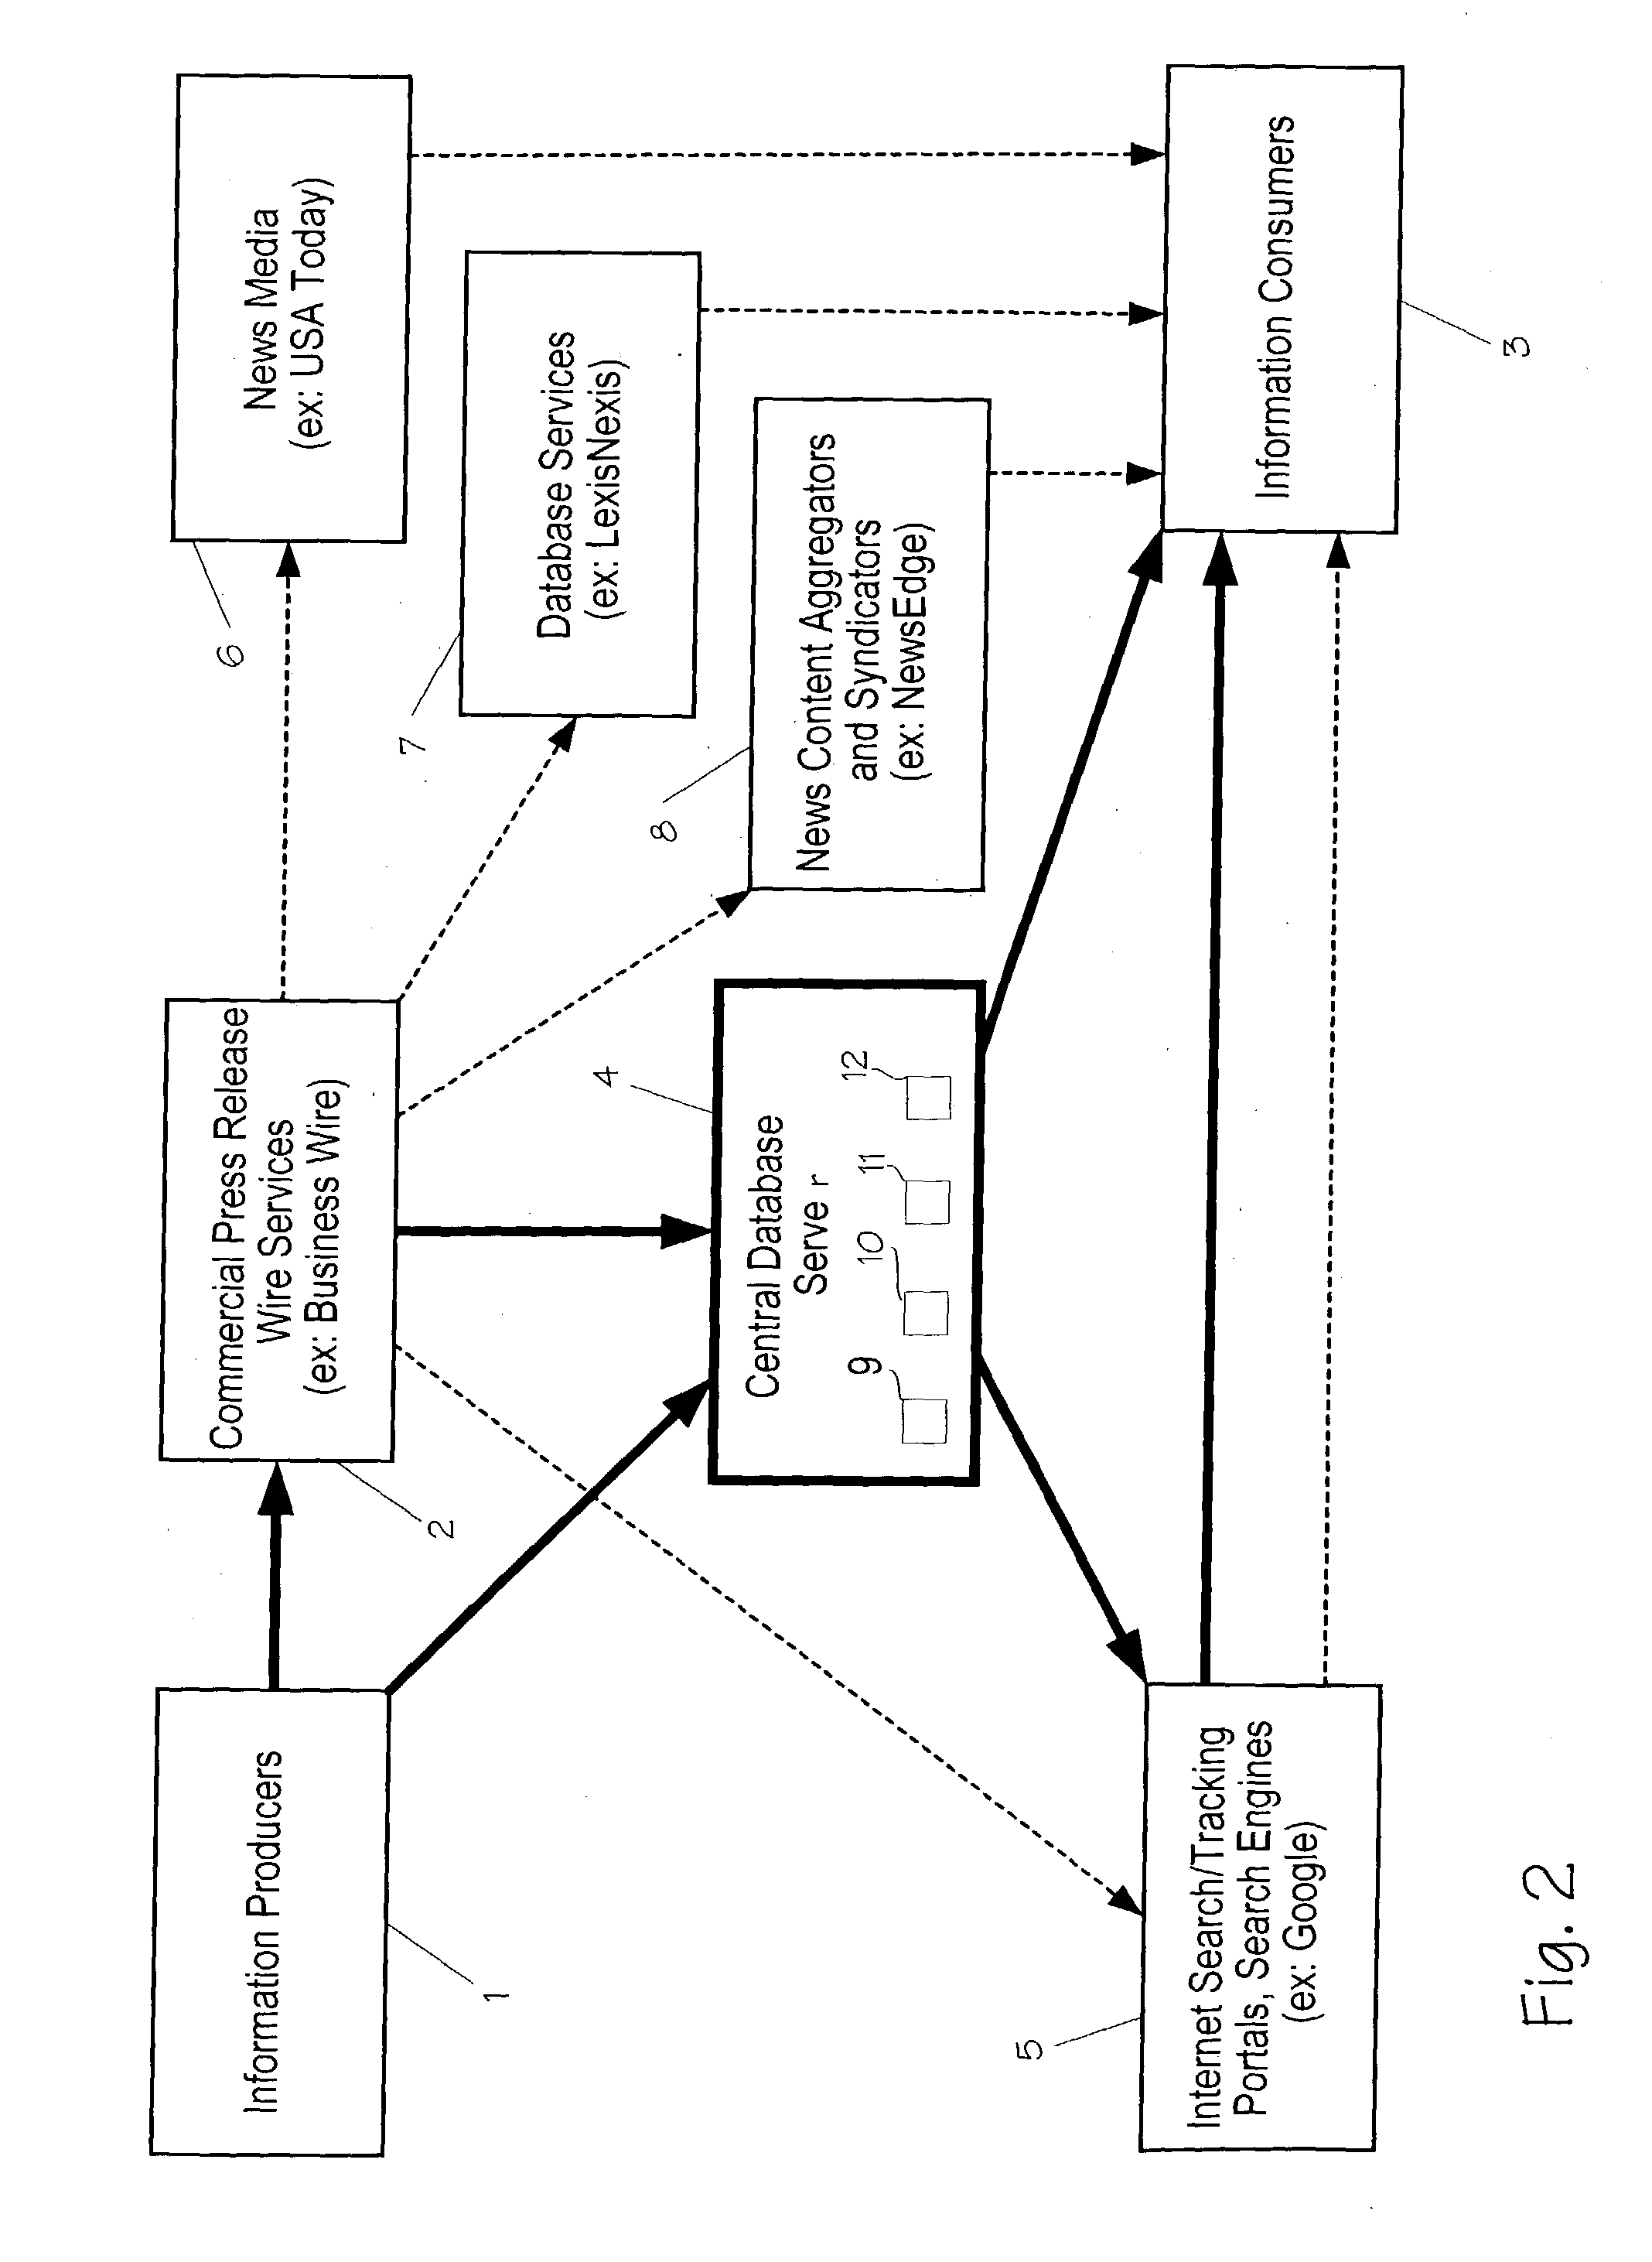 System and method of distributing public relations and marketing content